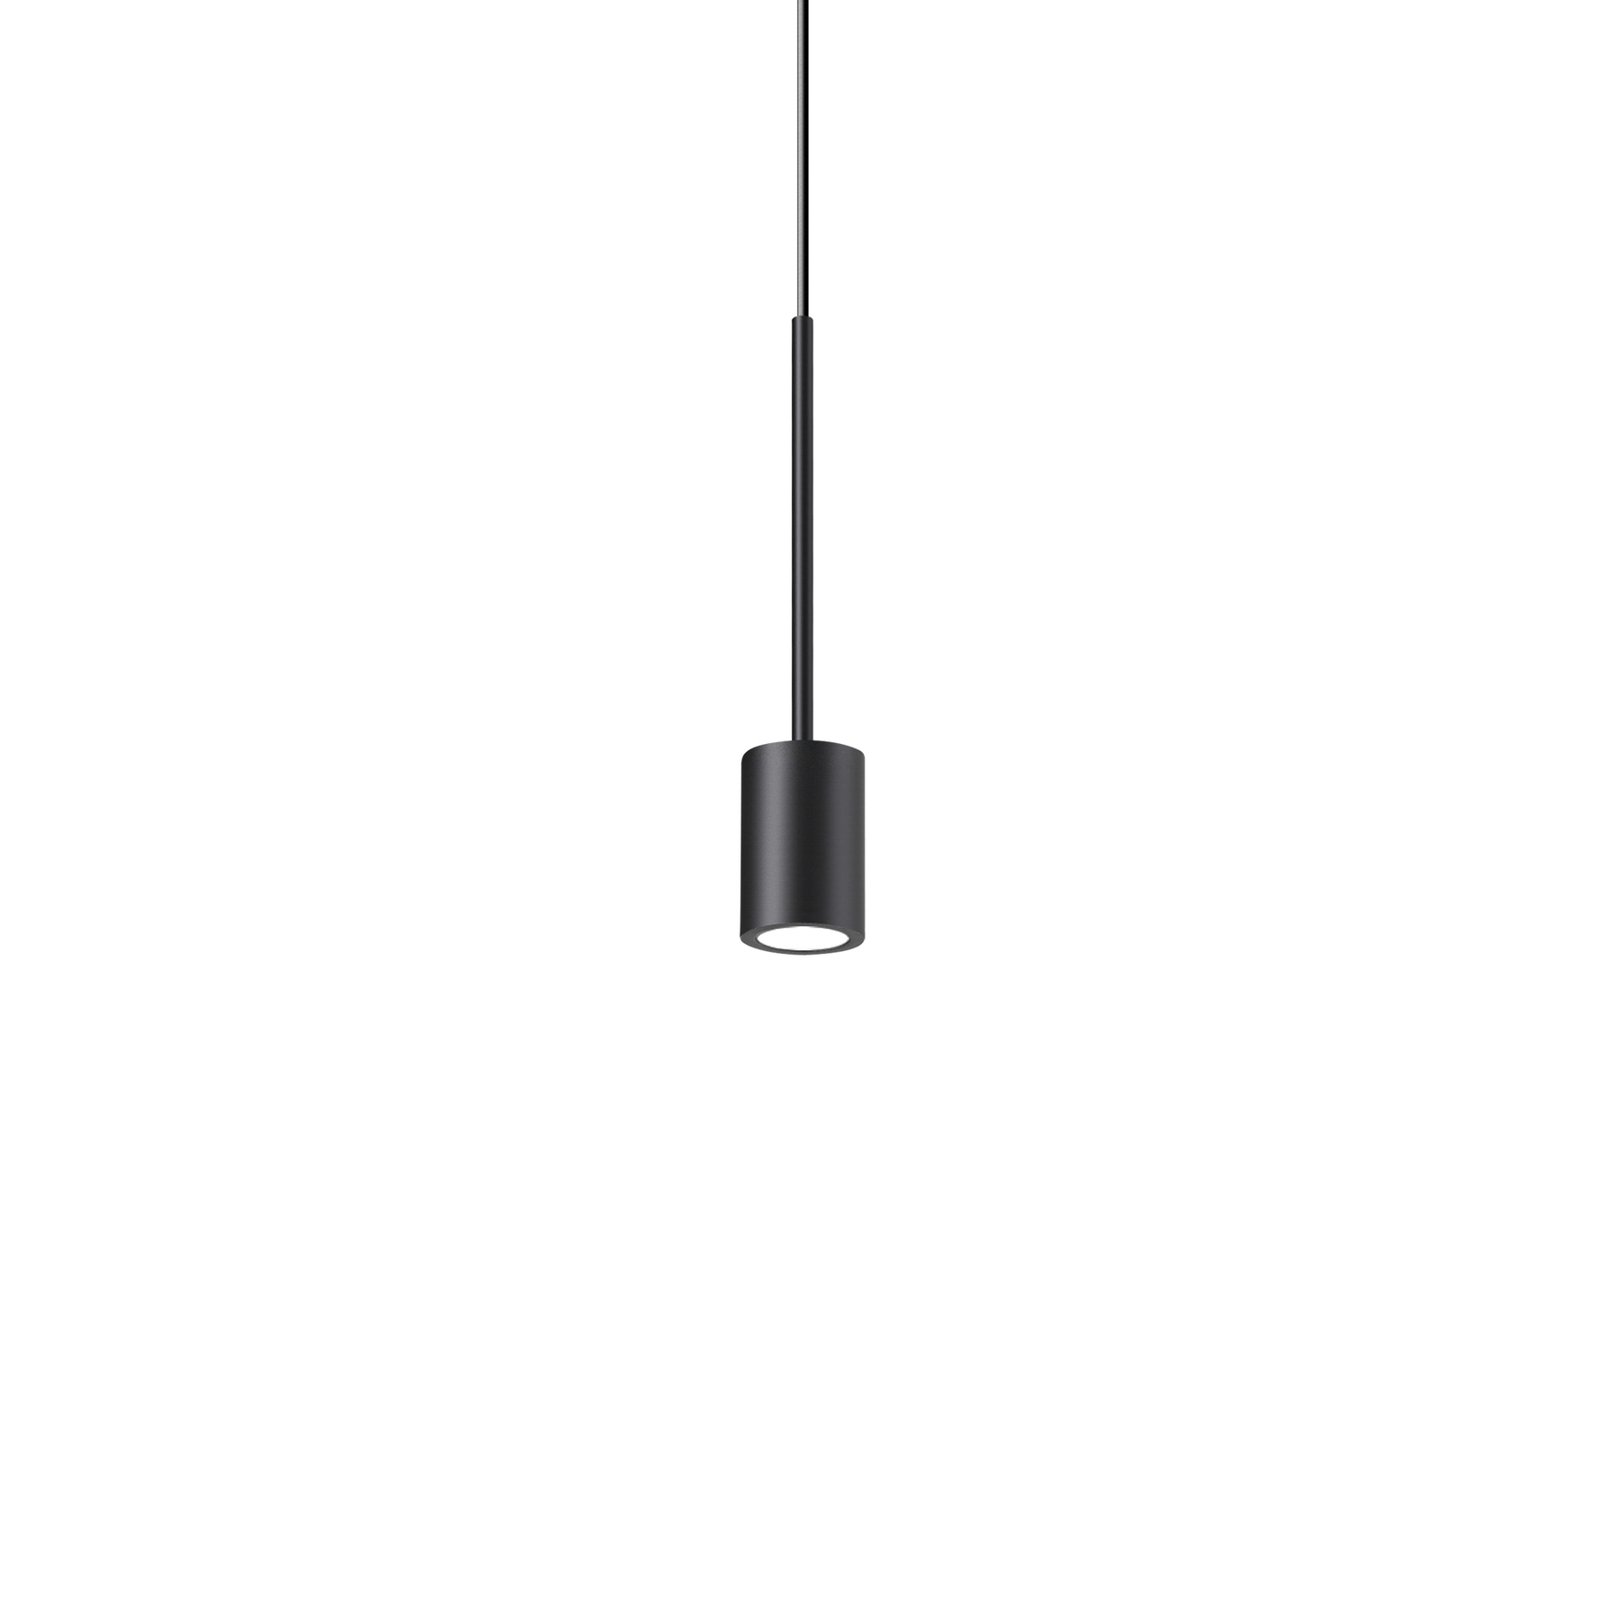 Ideal Lux LED pendant light Archimede Cilindro black metal